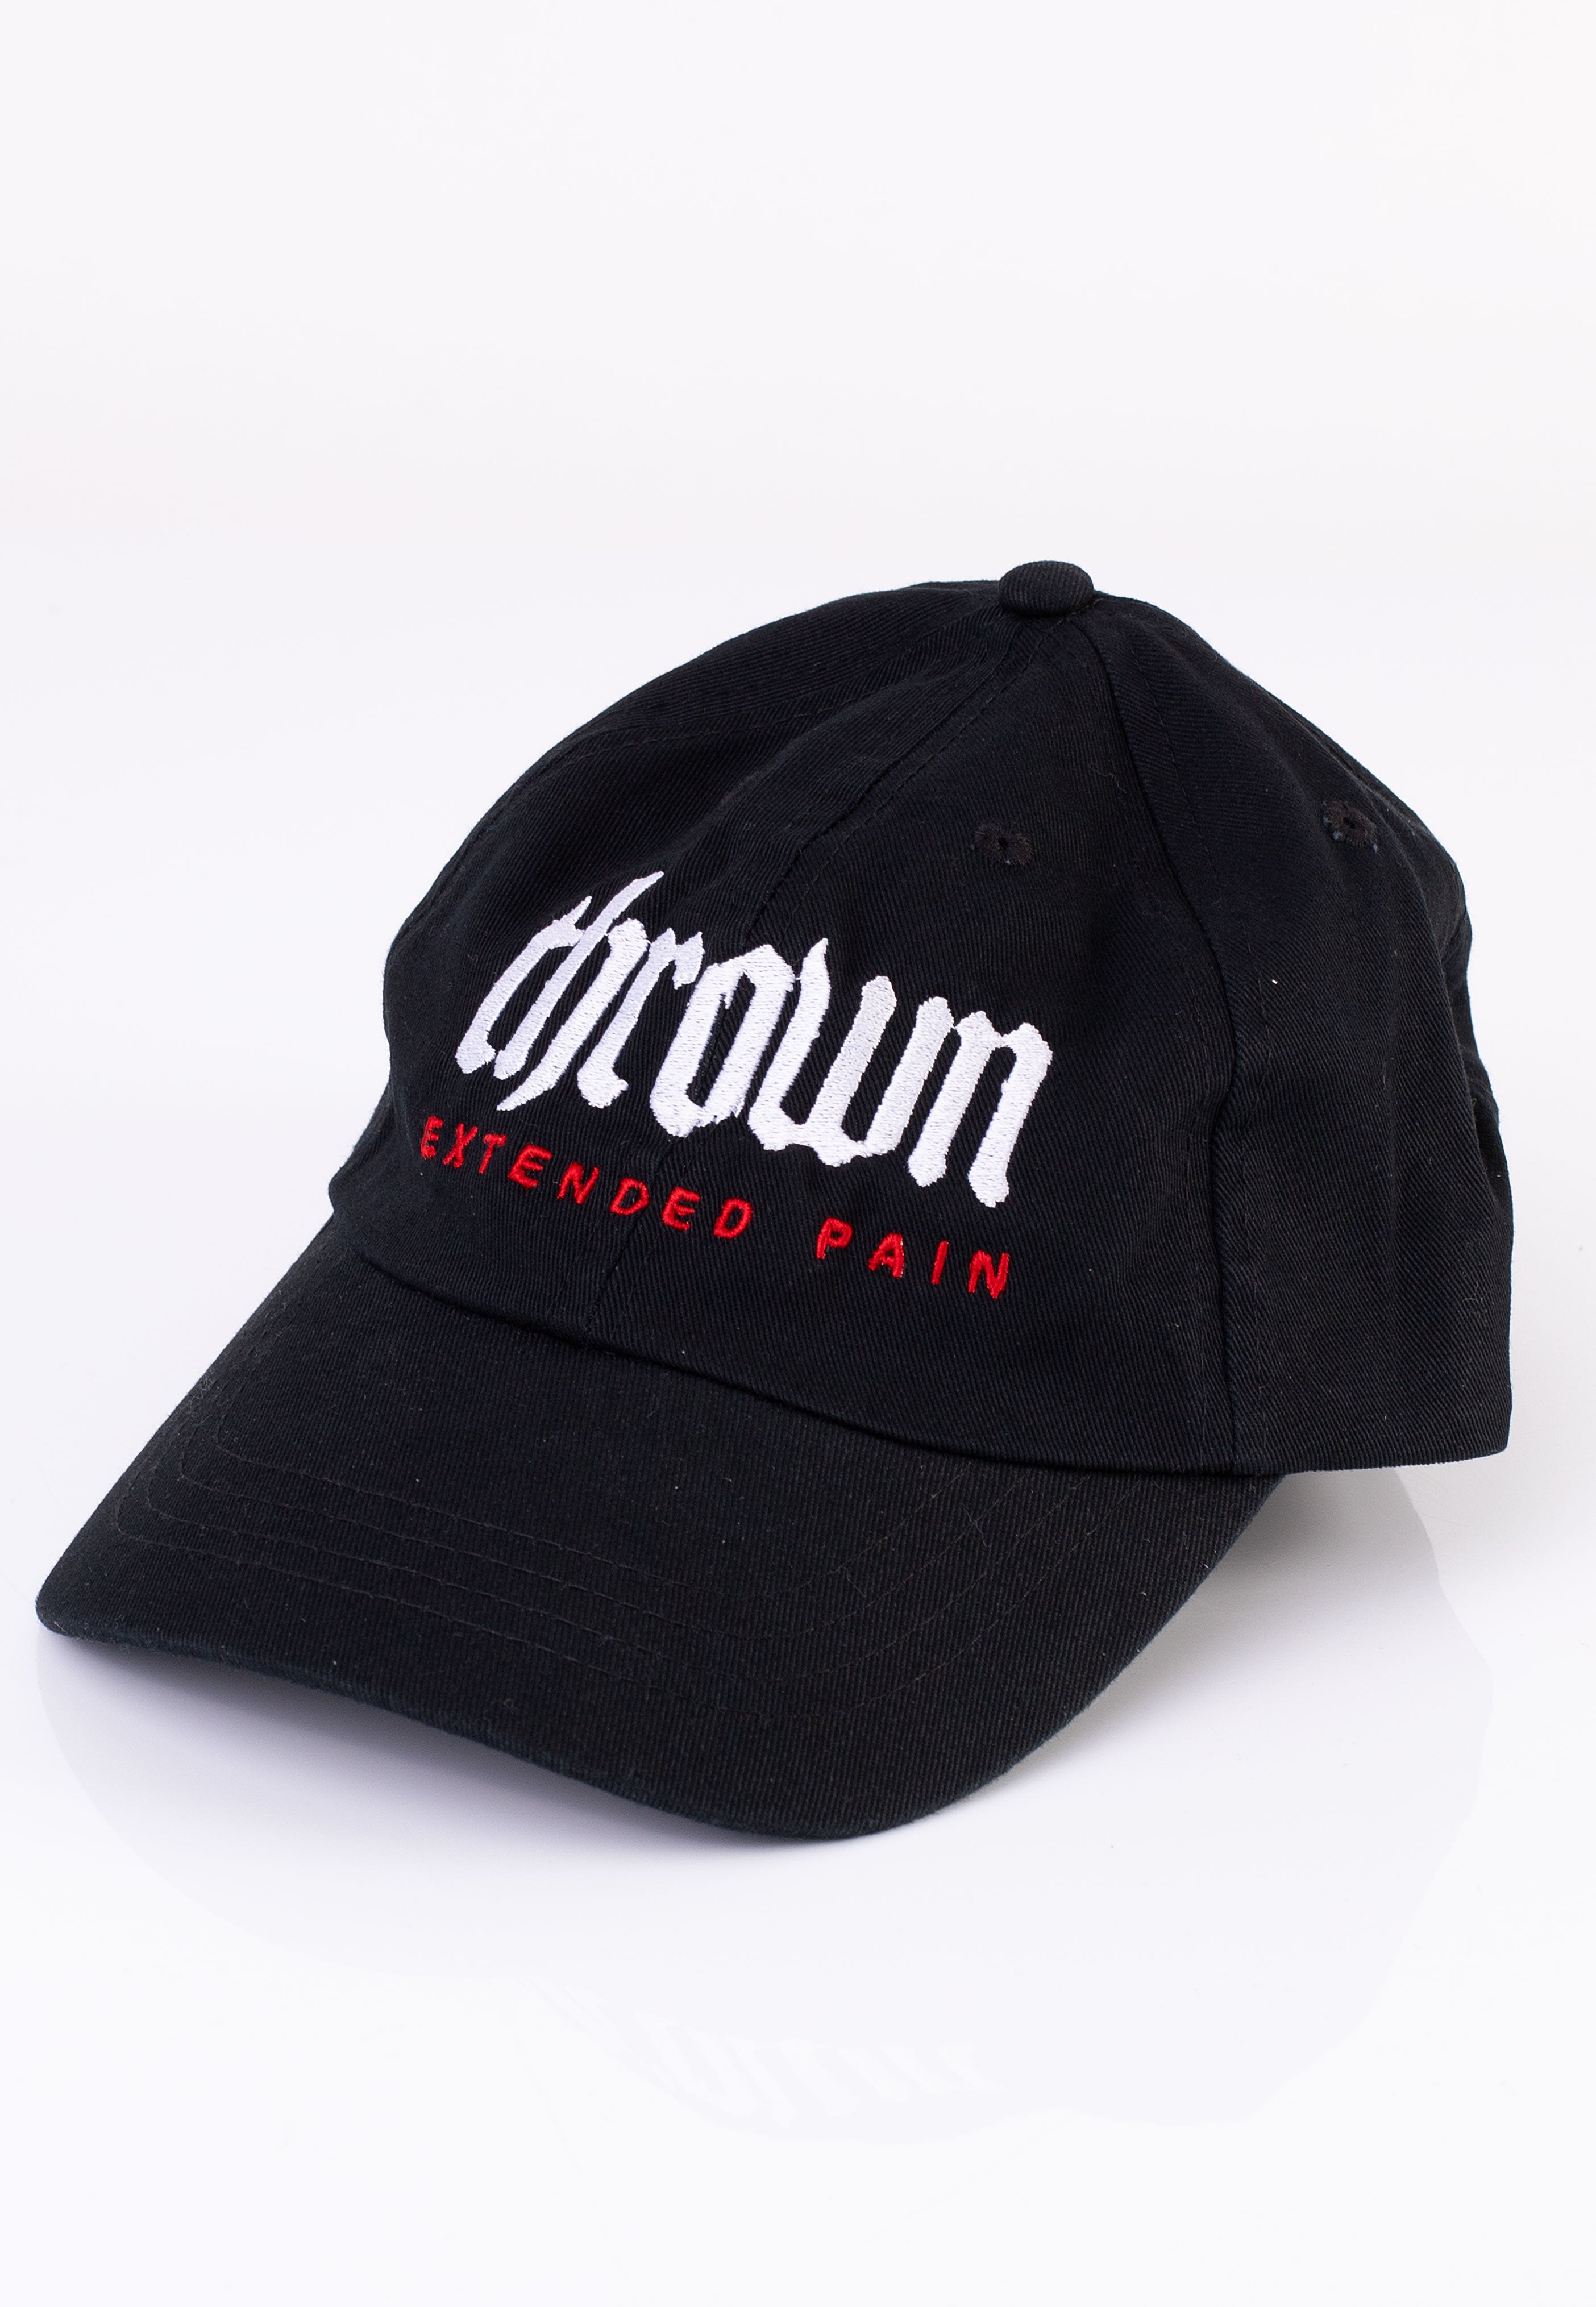 Thrown - Extended Pain Logo Embroidery - Cap